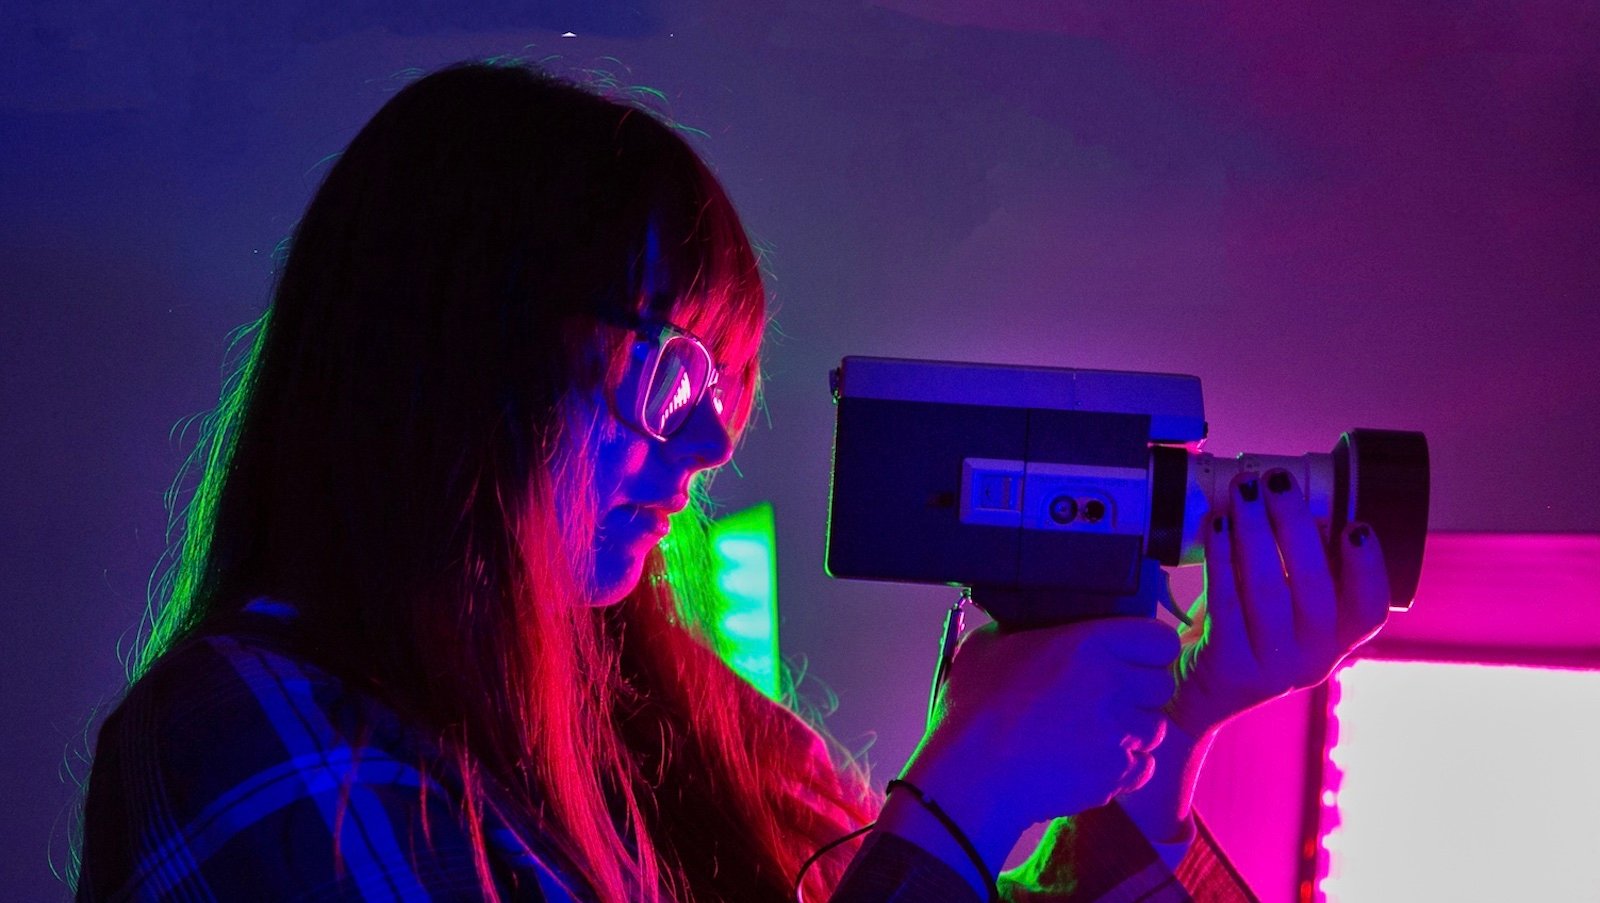 A young woman in profile in glasses looks through the lens of a camera